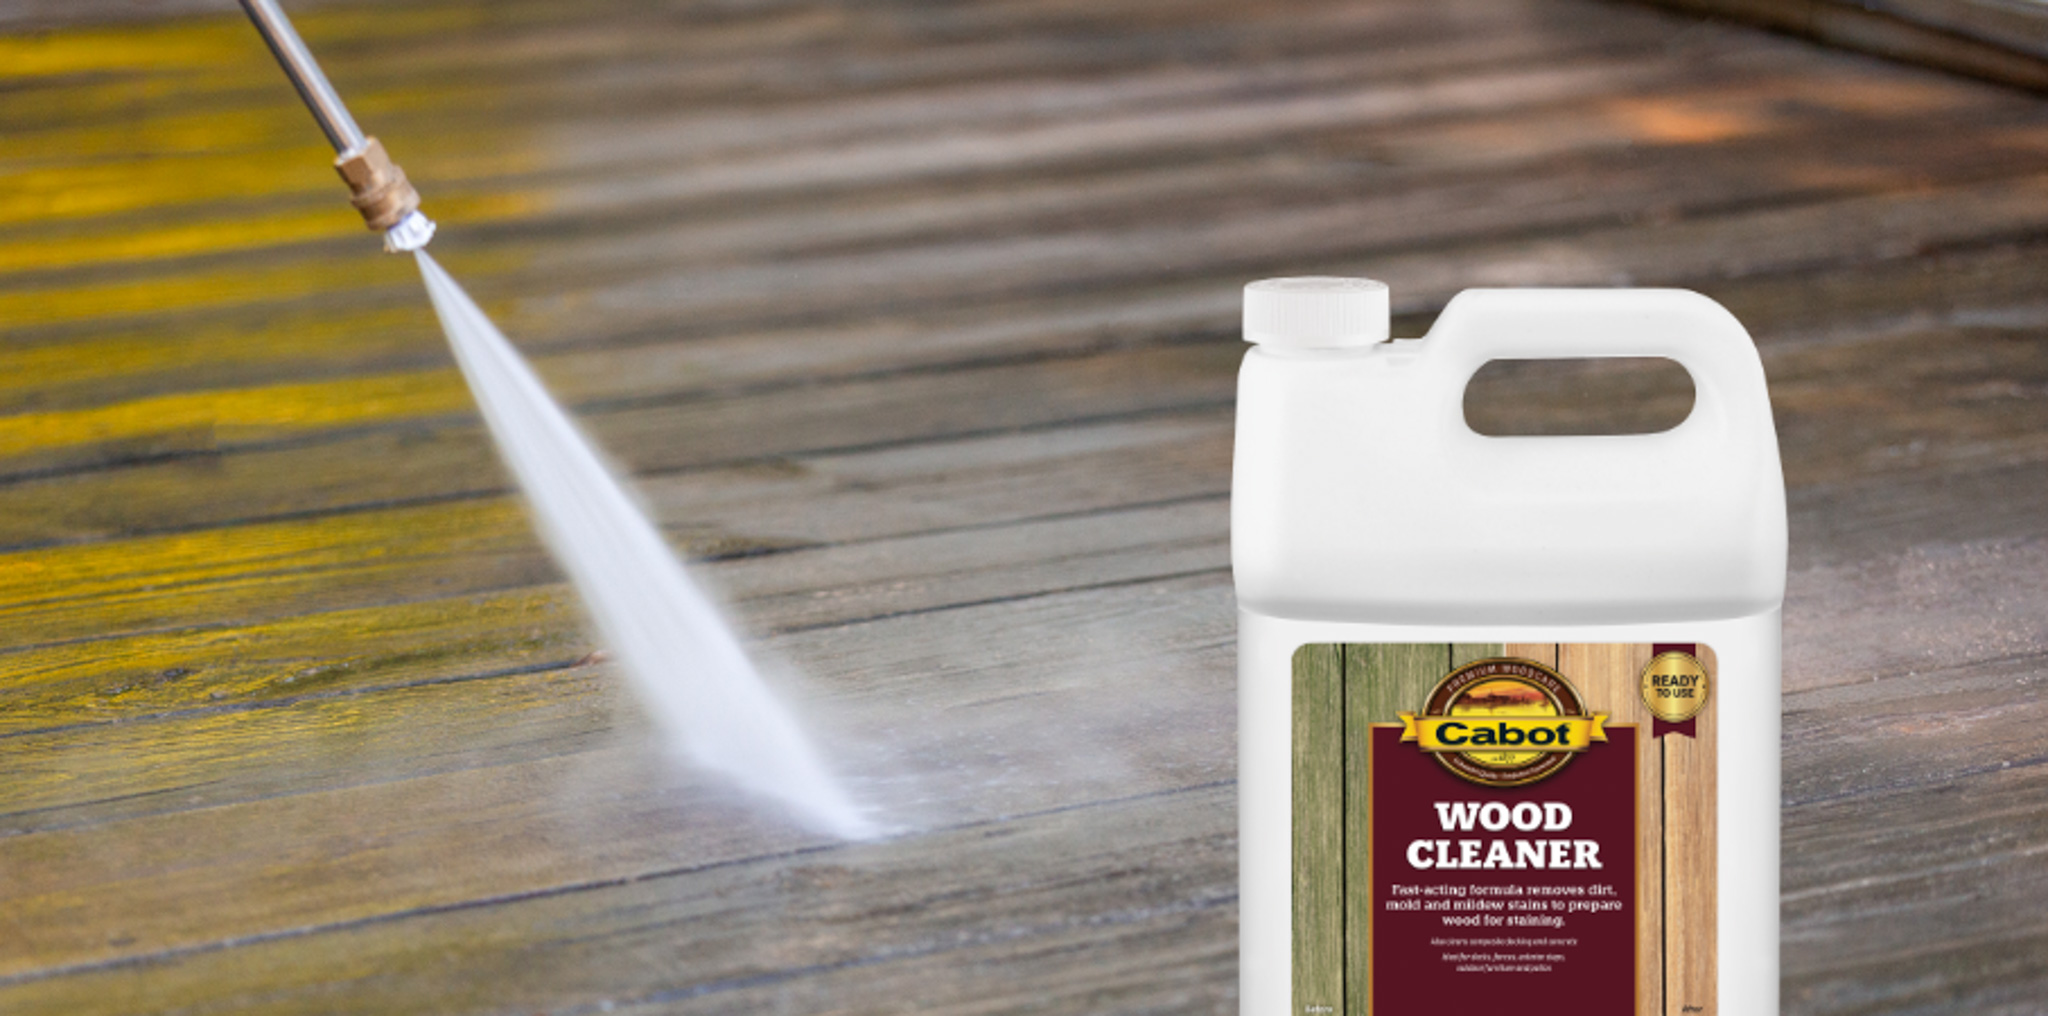 pressure washing a deck with Cabot Wood Cleaner